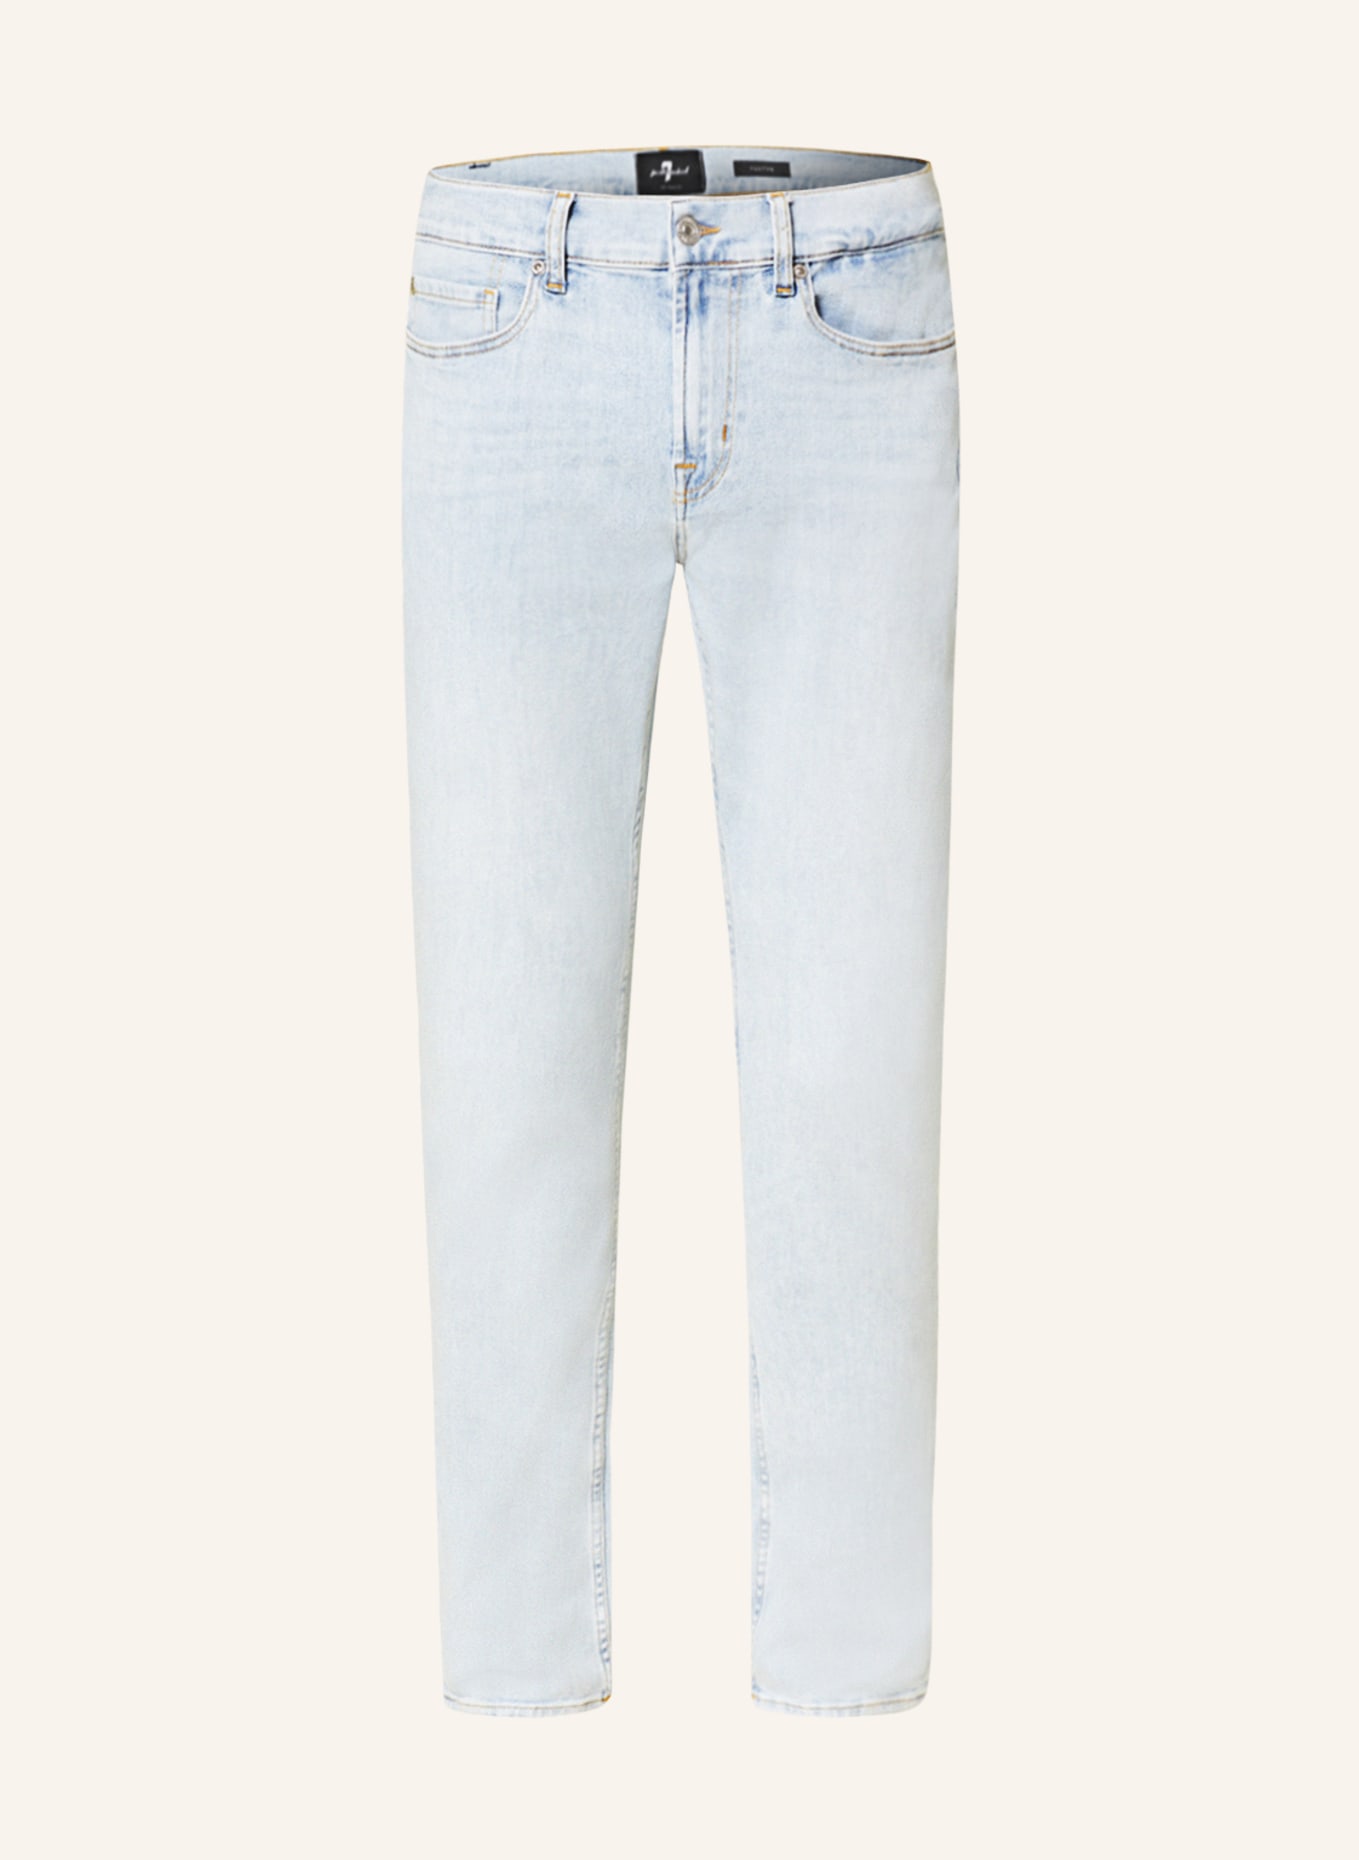 7 for all mankind Jeans PAXTYN Skinny Fit, Farbe: BLEACH (Bild 1)